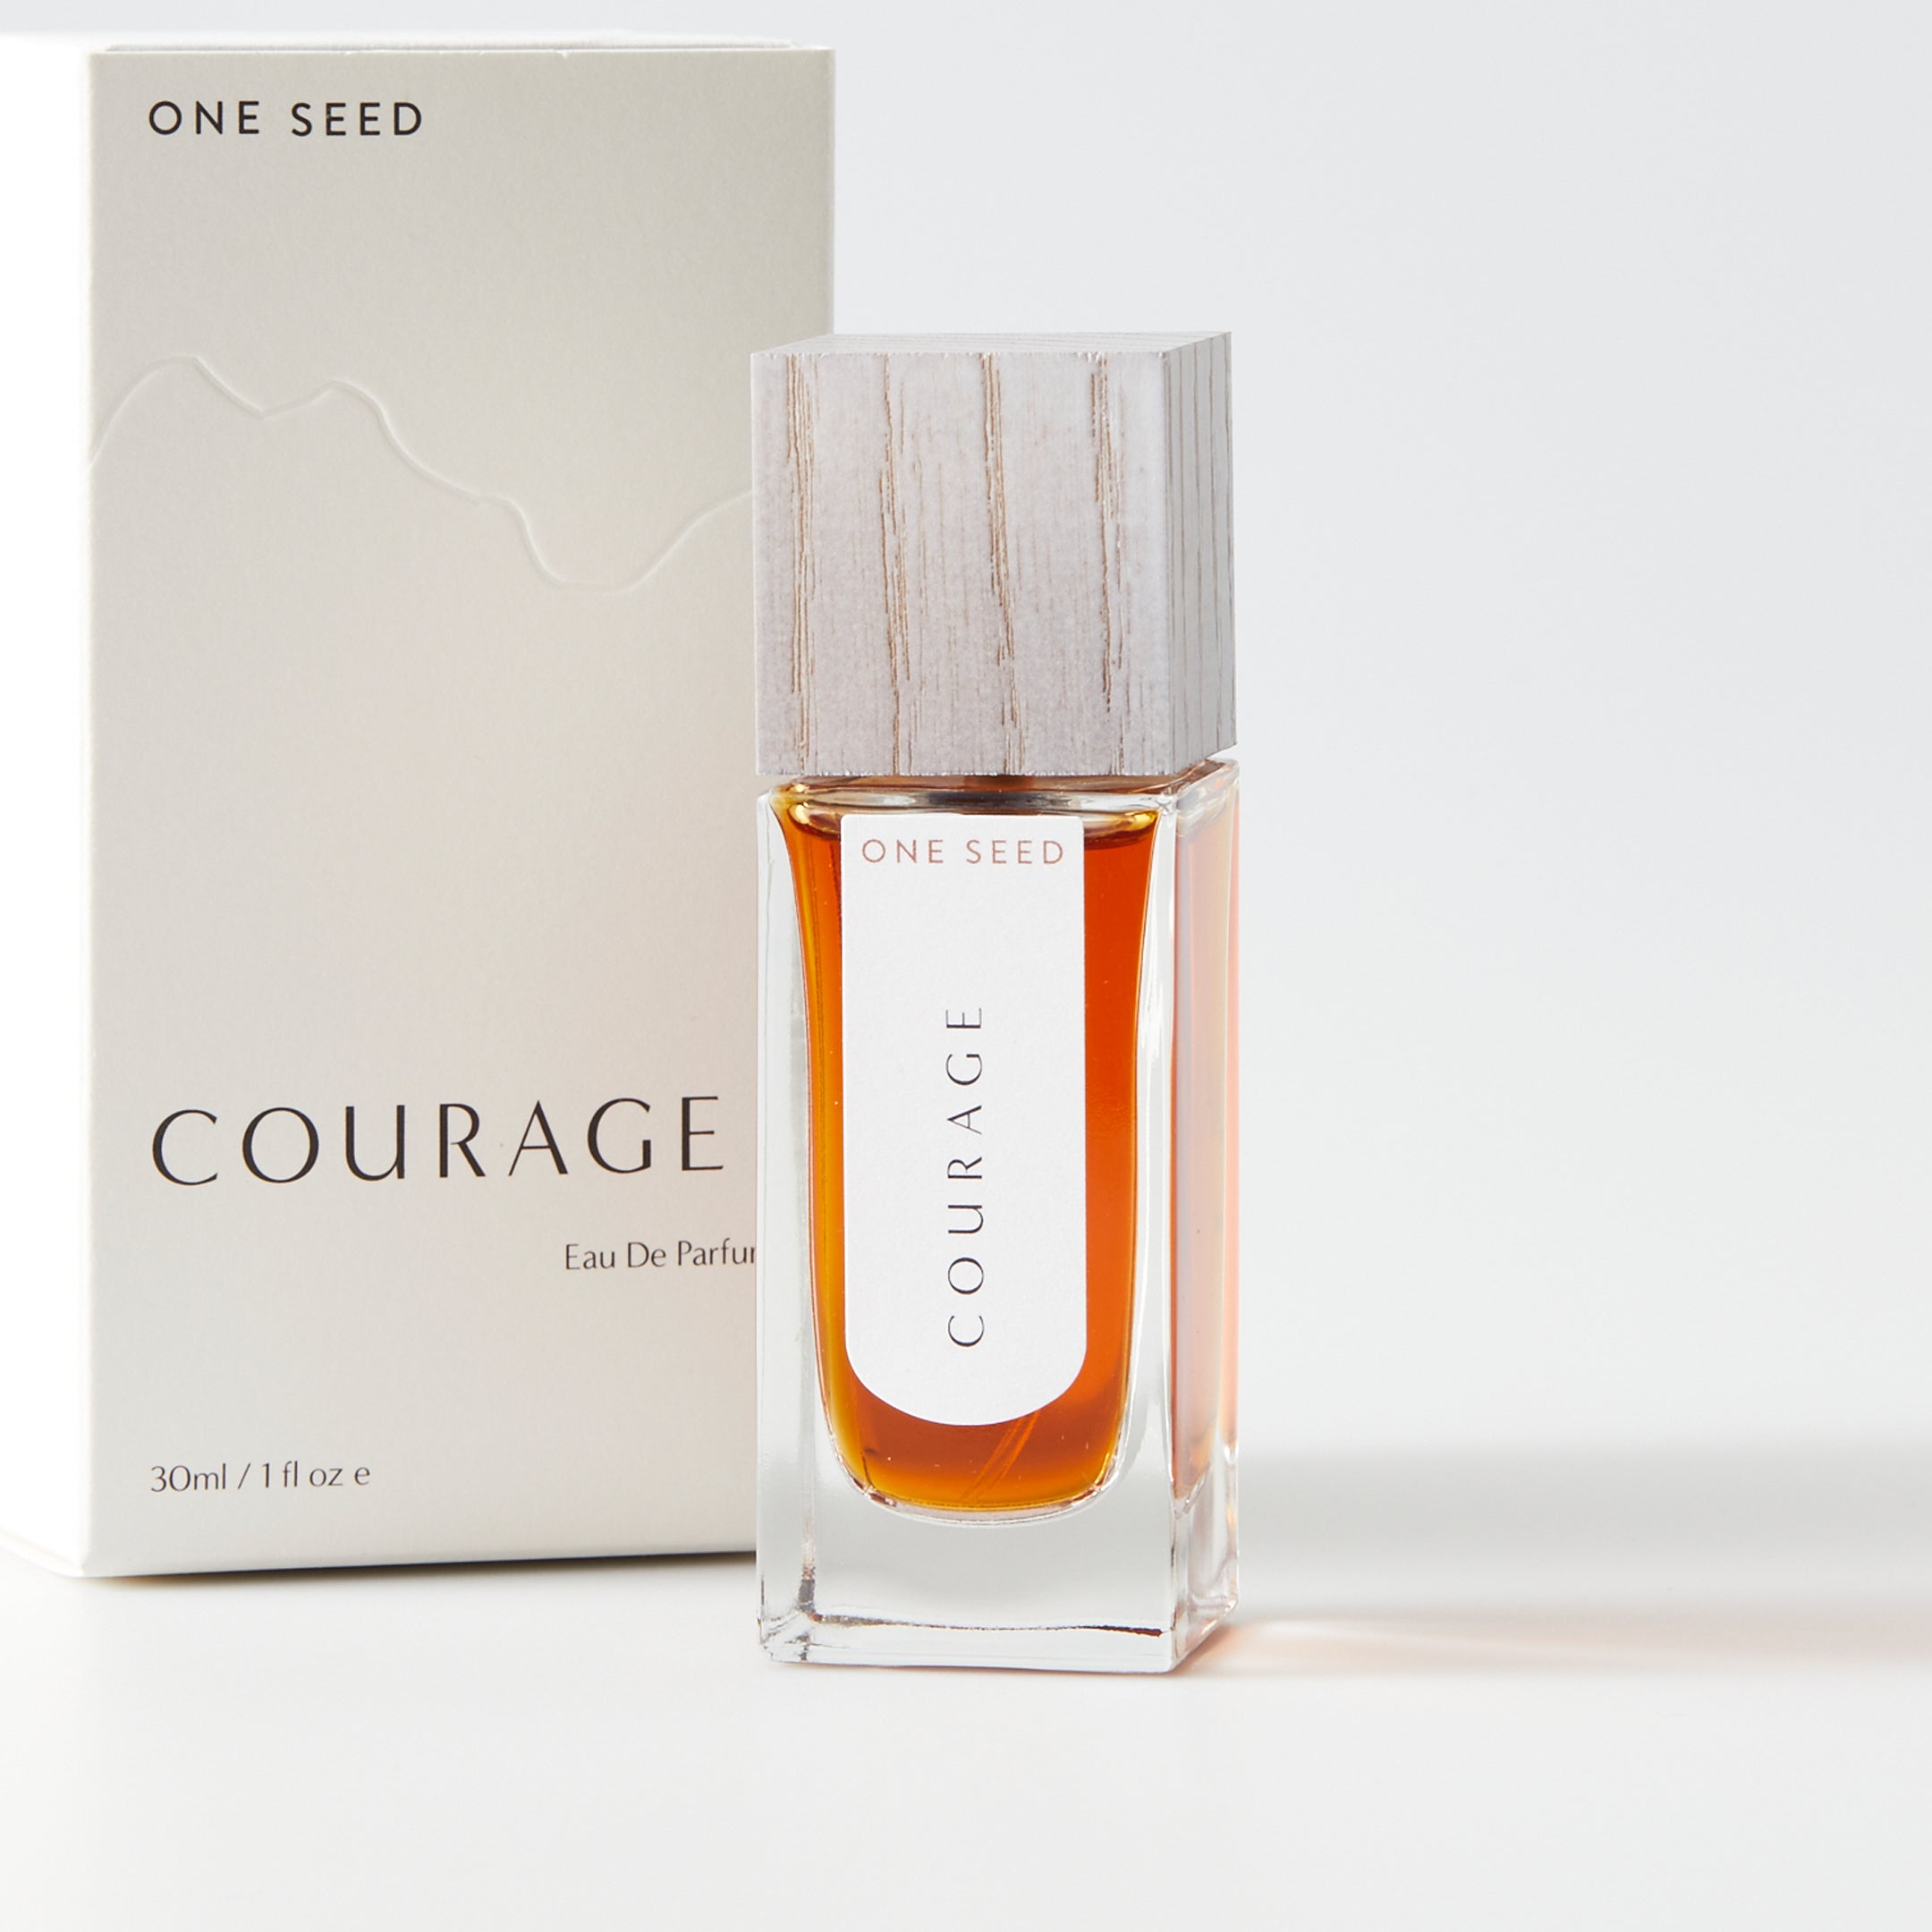 Natural perfume One Seed Courage at Sensoriam